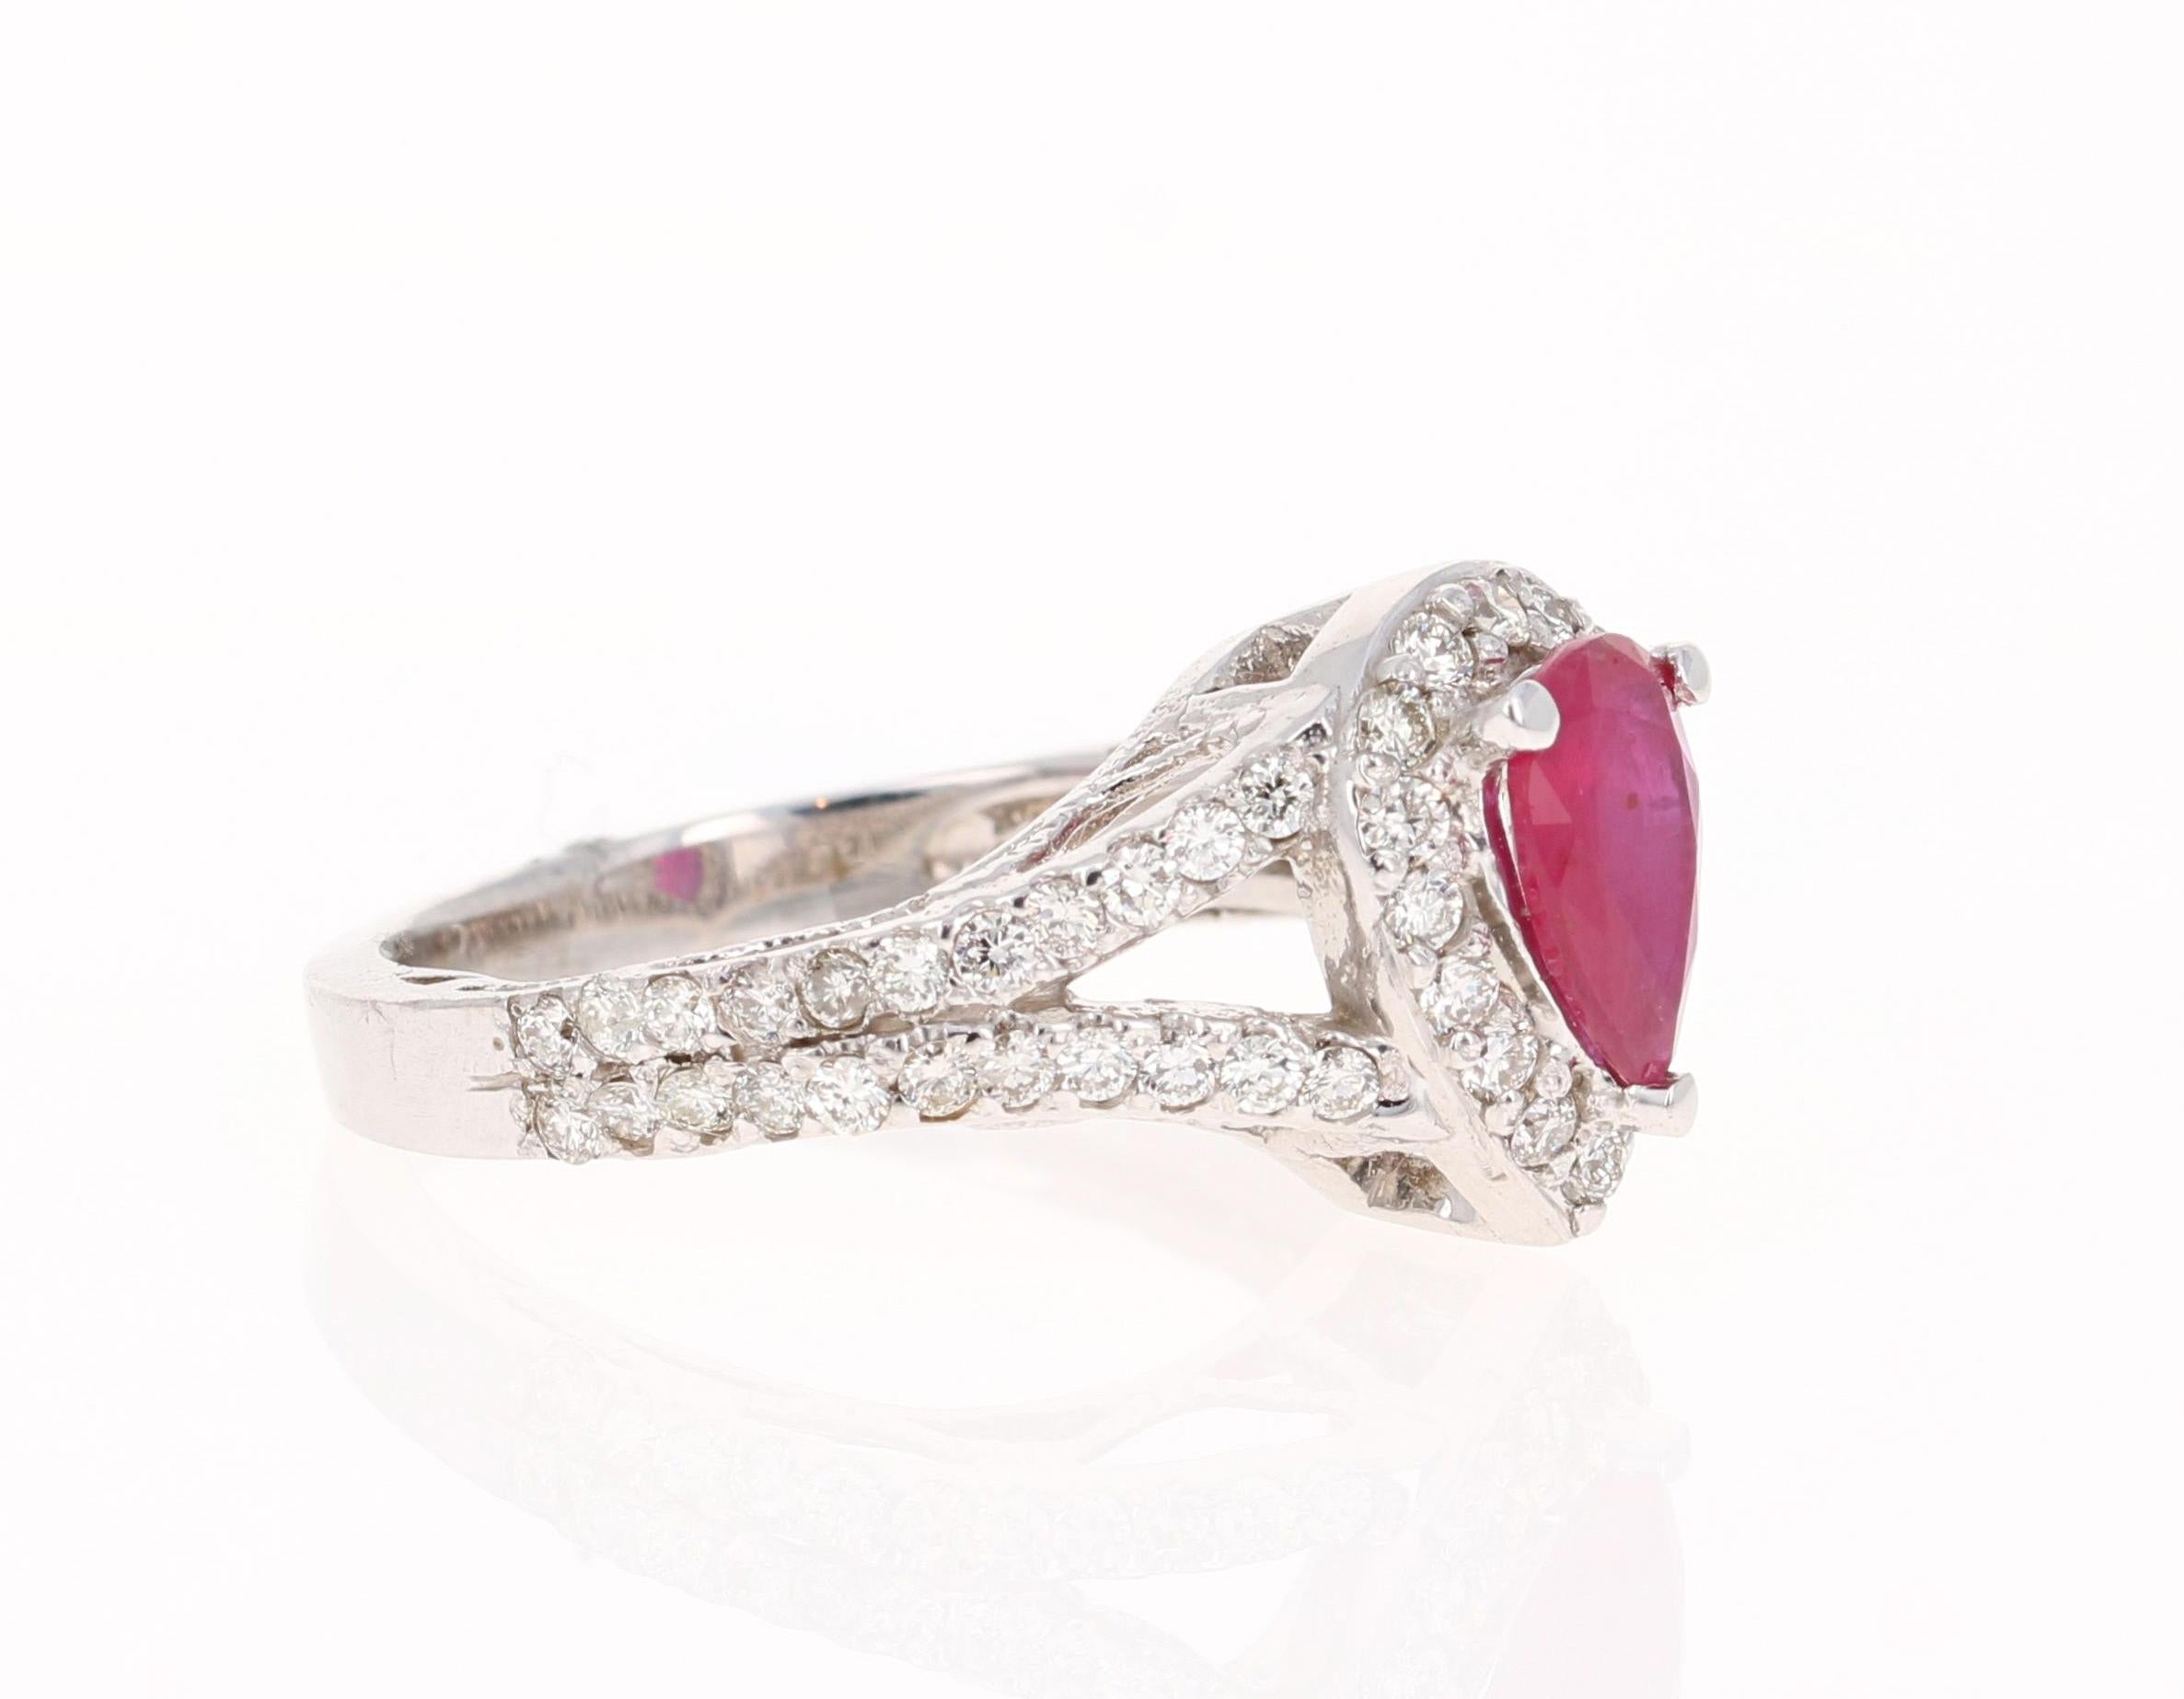 This ring is truly a beauty! 
There is a Pear Cut Ruby set in the center of the ring that weighs 0.88 carats. There are also 60 Round Cut Diamonds that weigh 0.76 carats (Clarity: VS2, Color: H).  The total carat weight of the ring is 1.64 carats. 